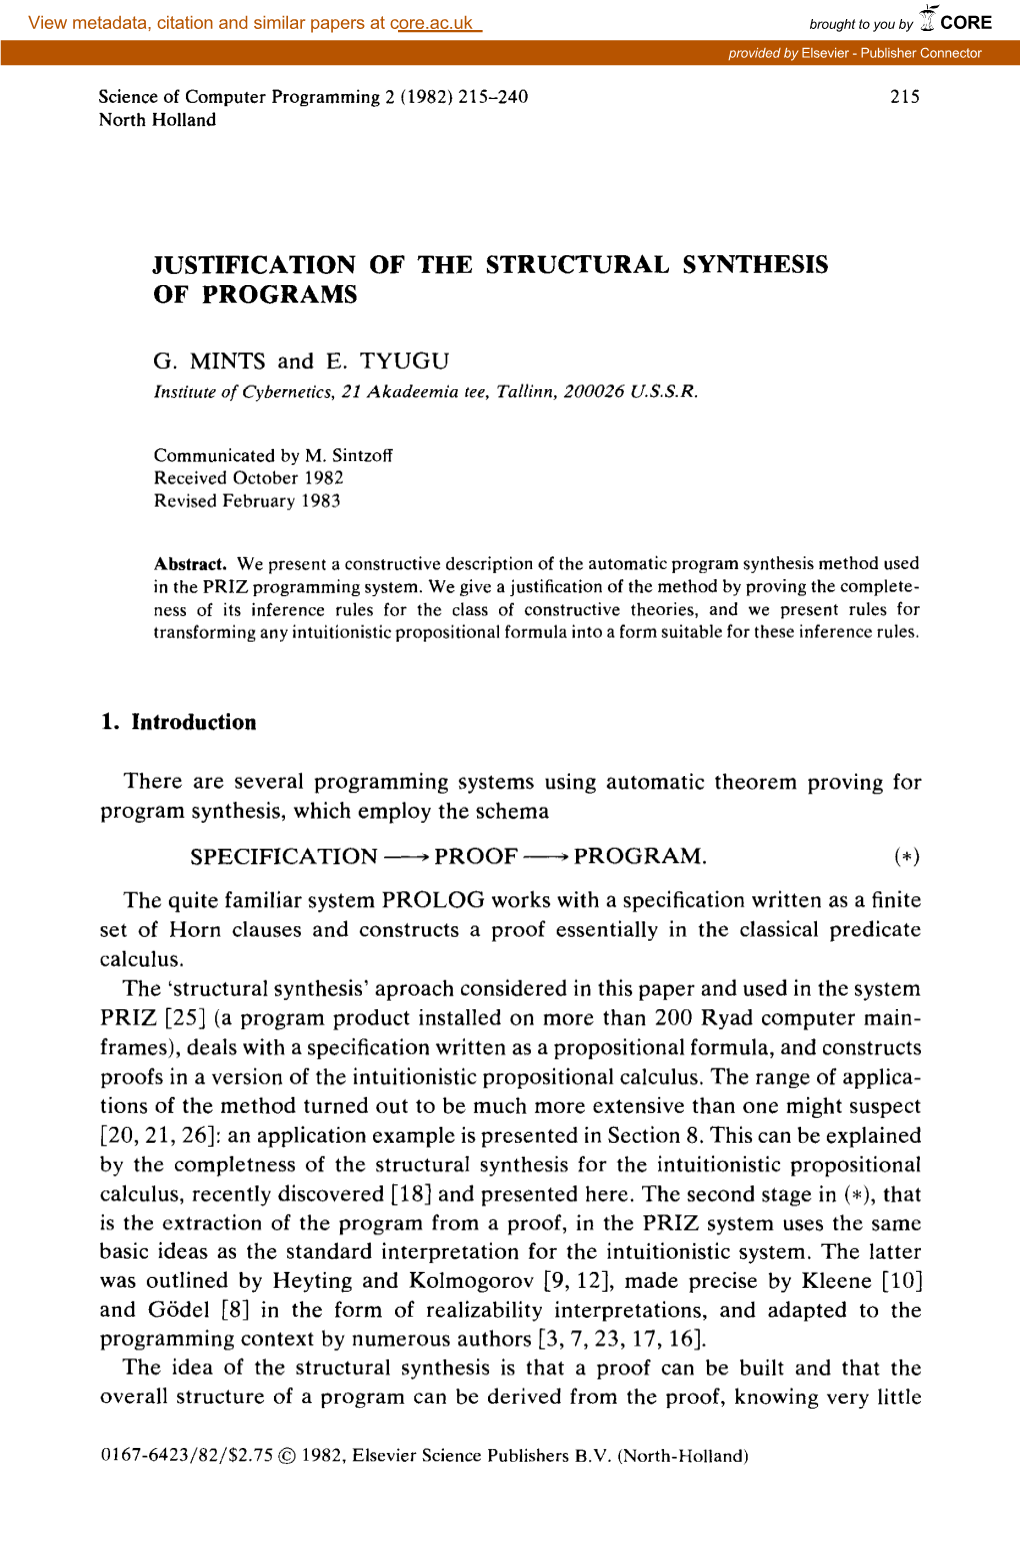 Justification of the Structural Synthesis of Programs